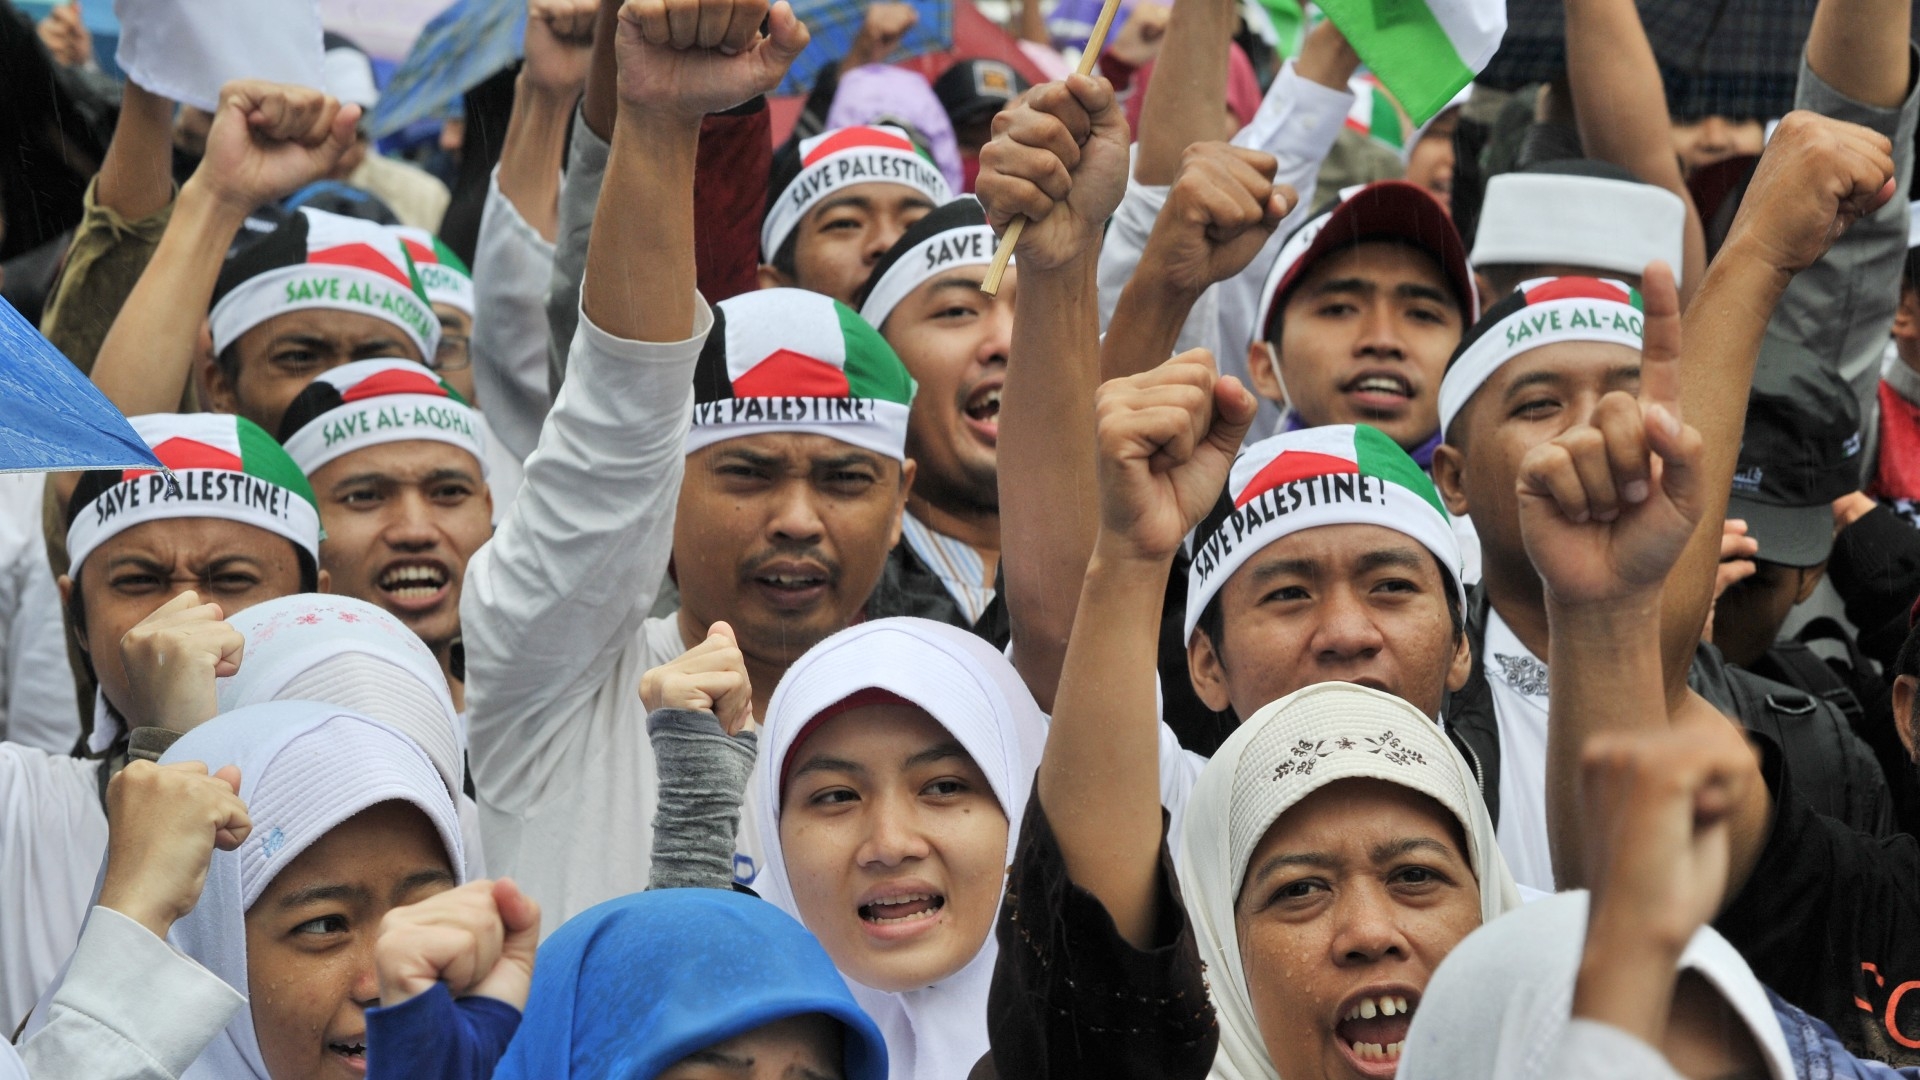 Indonesian Muslims attend a rally to support Palestinians in Jakarta on 13 July 2014 (AFP)